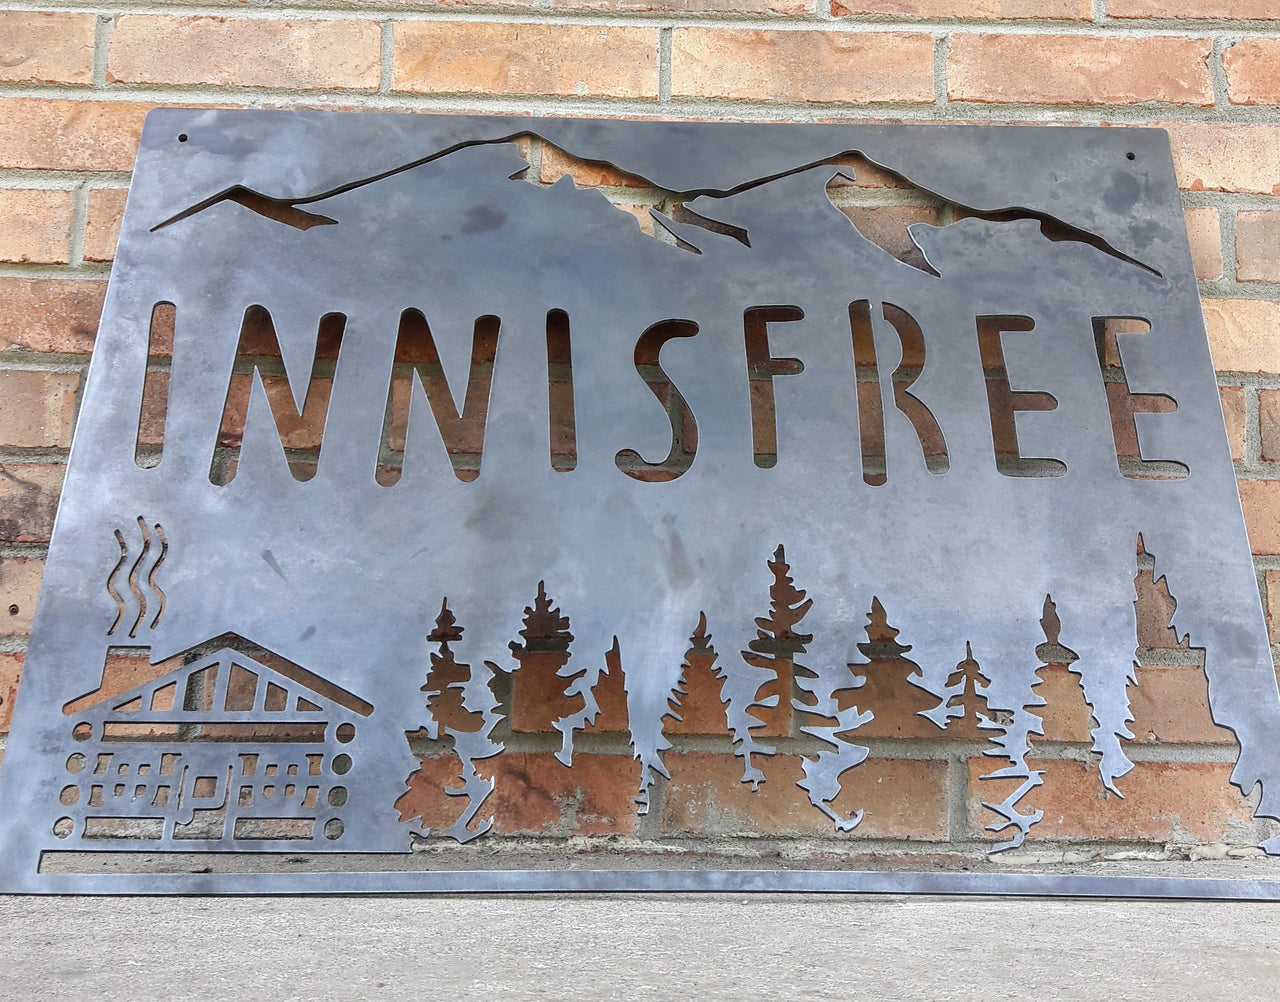 This sign is displays a mountain range in the background with a forest and cabin. The sign reads, "INNISFREE".